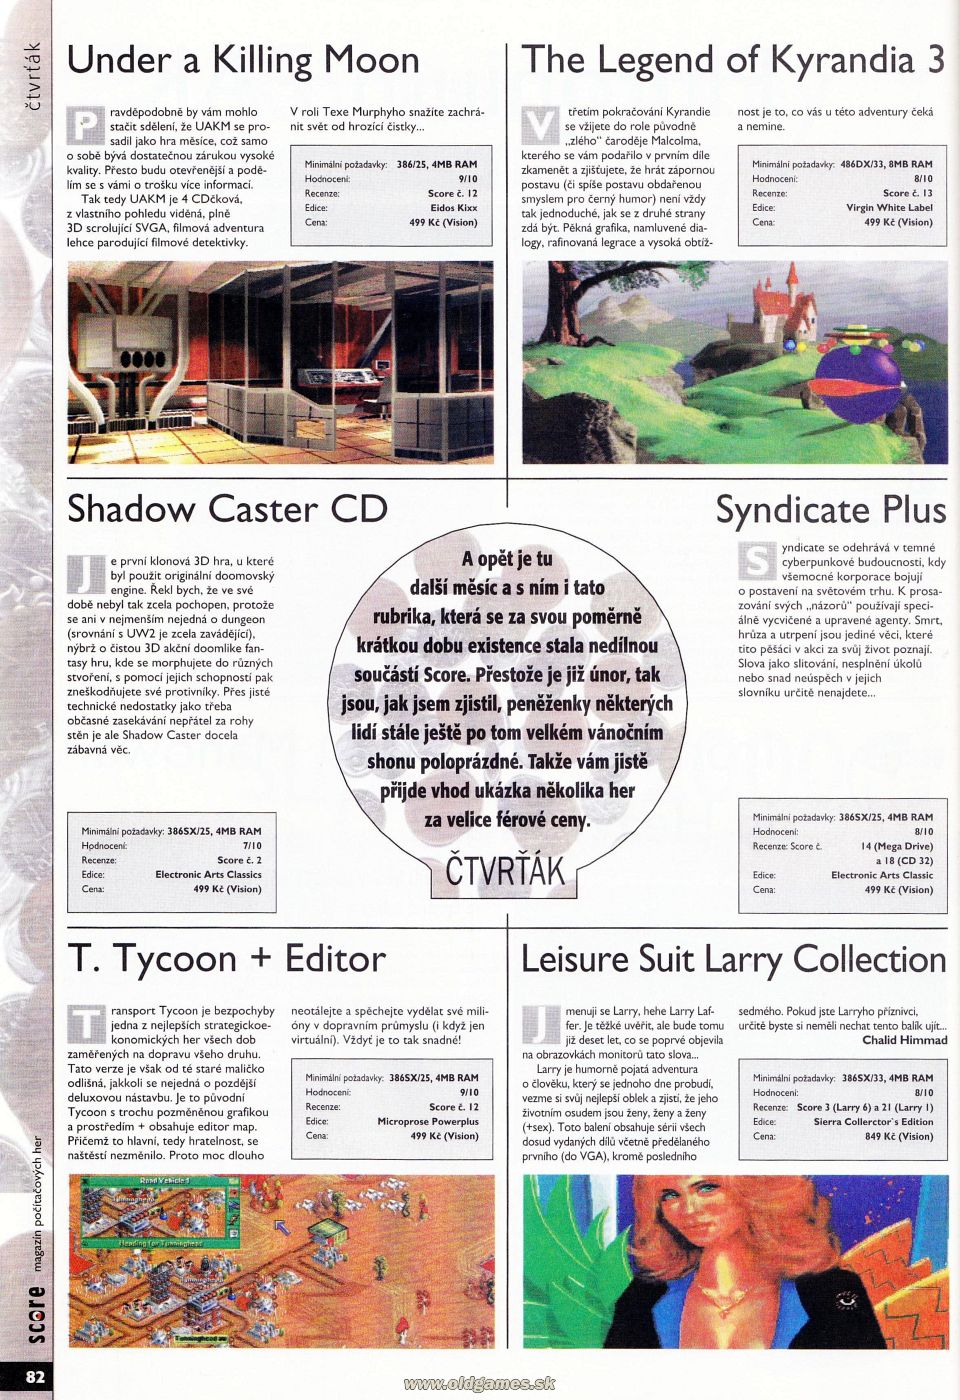 Under a Killing Moon, Kyrandia 3, Shadow Caster, Syndicate Plus, T.Tycoon, Leisure Suit Larry